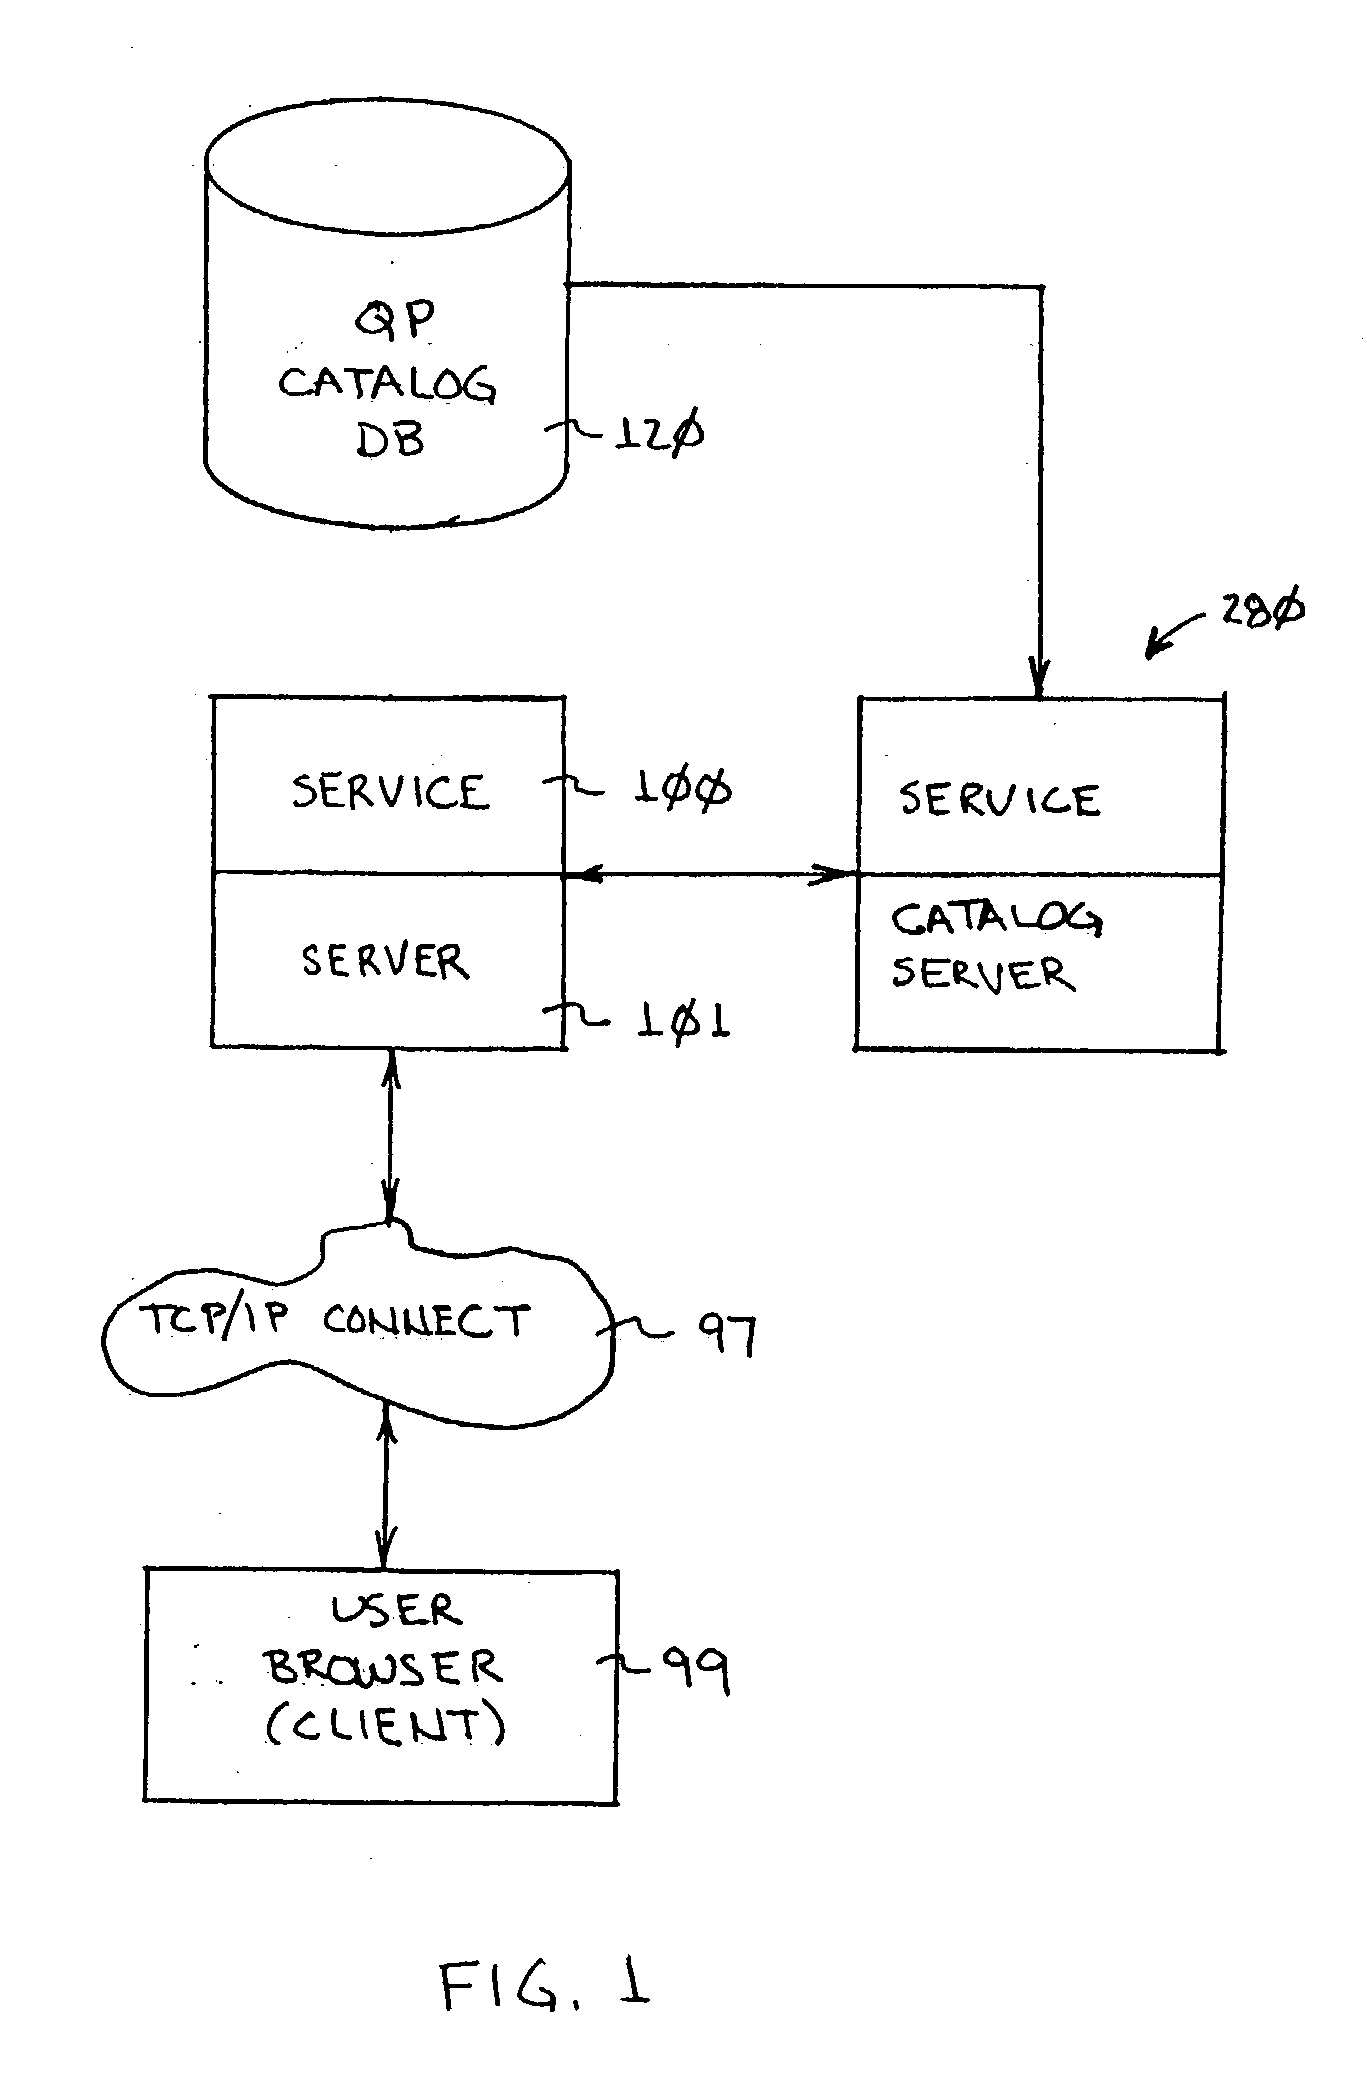 System and method for searching a plurality of databases distributed across a multi server domain